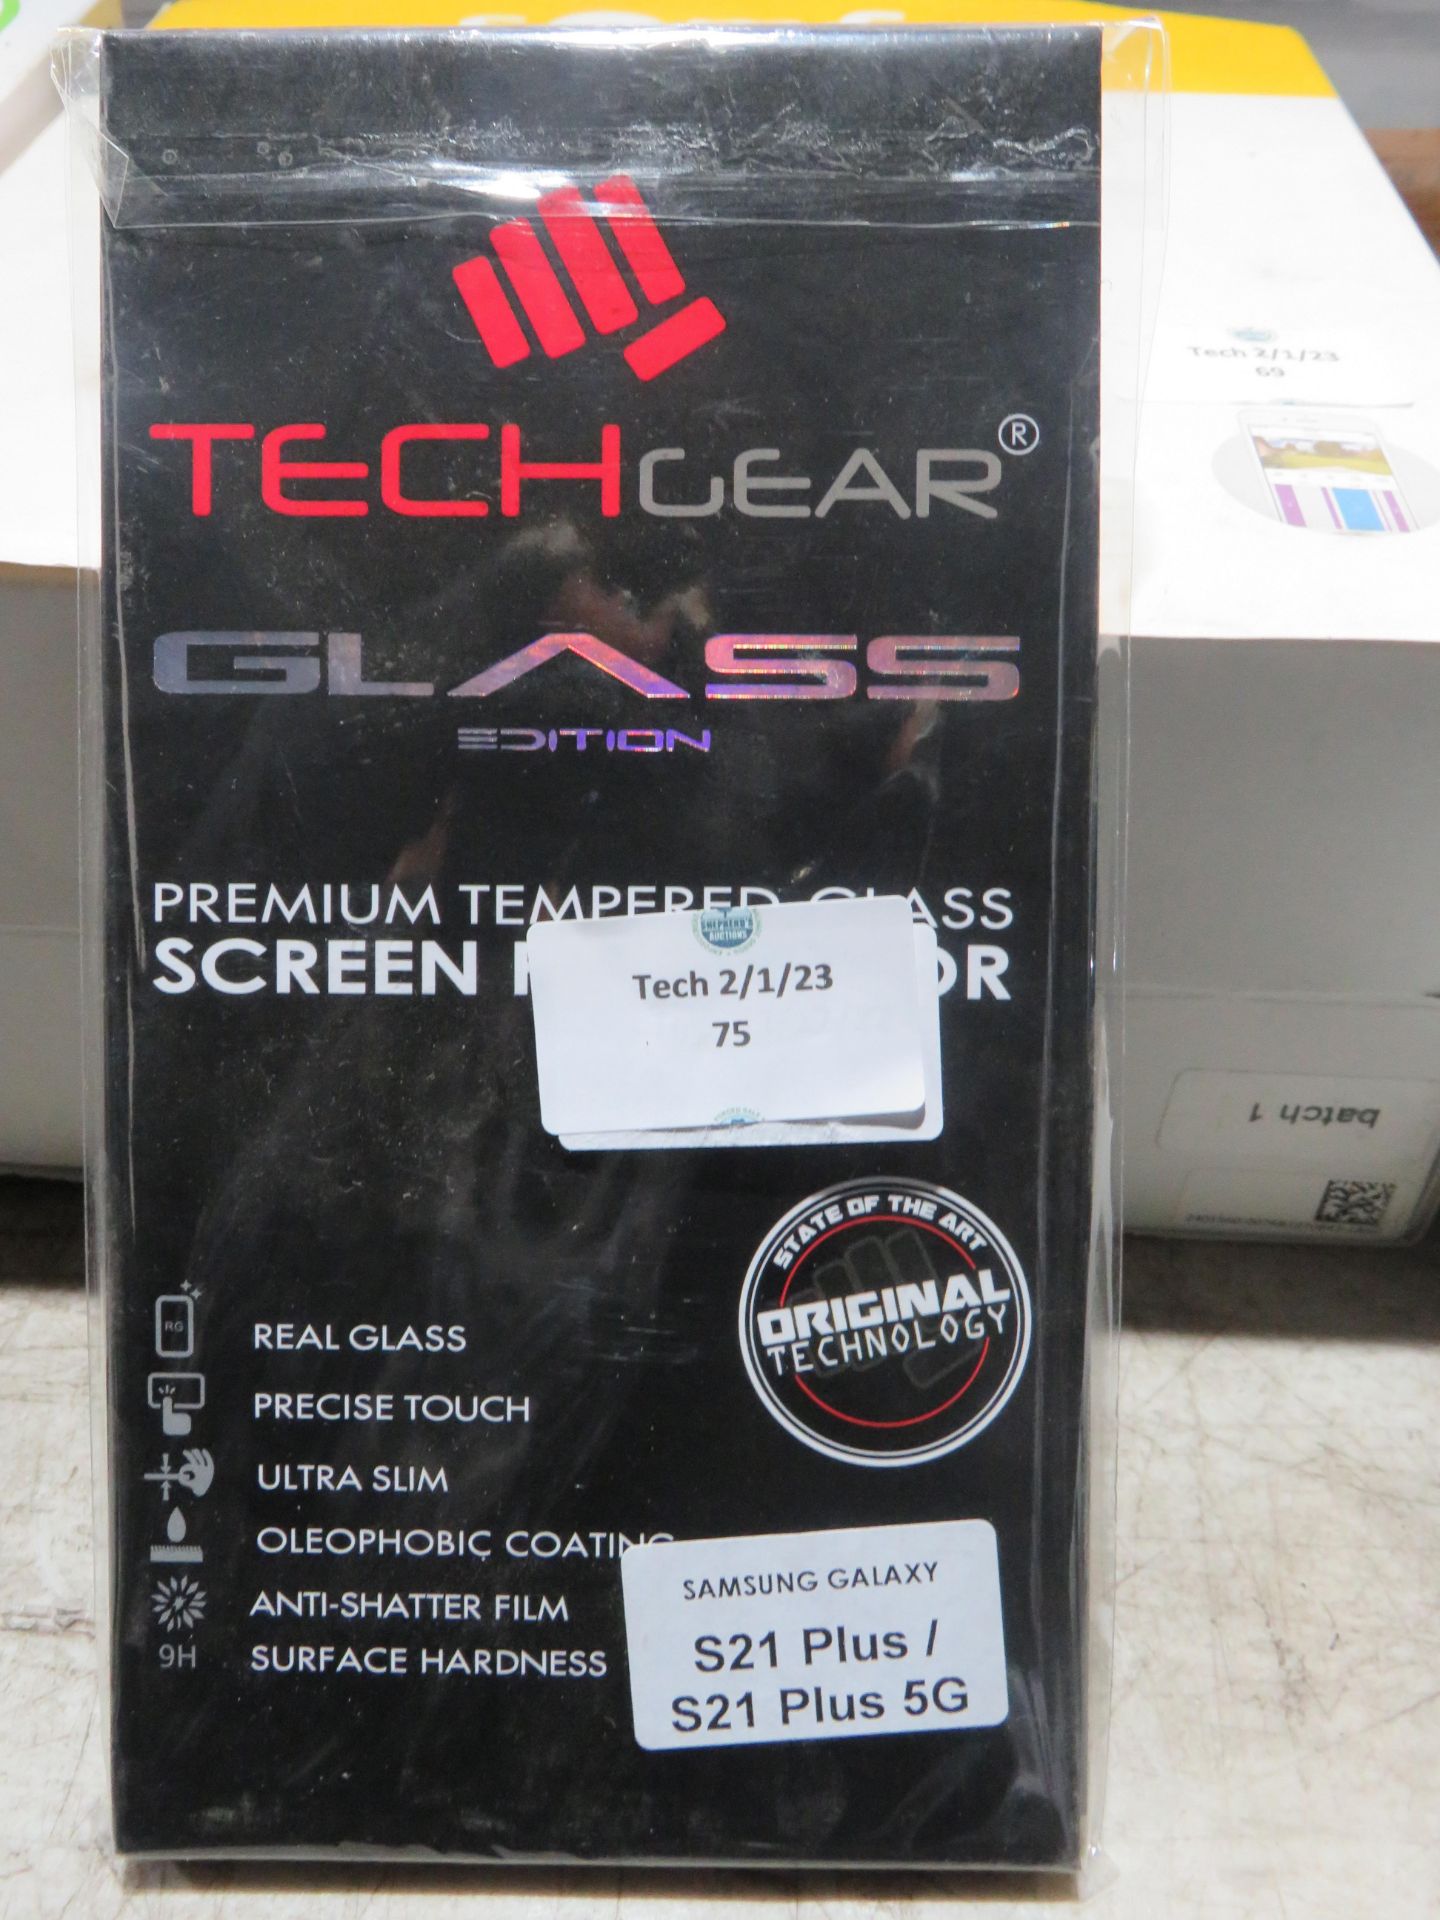 Premium tempered Glass screen protector for s21plus, new and unused